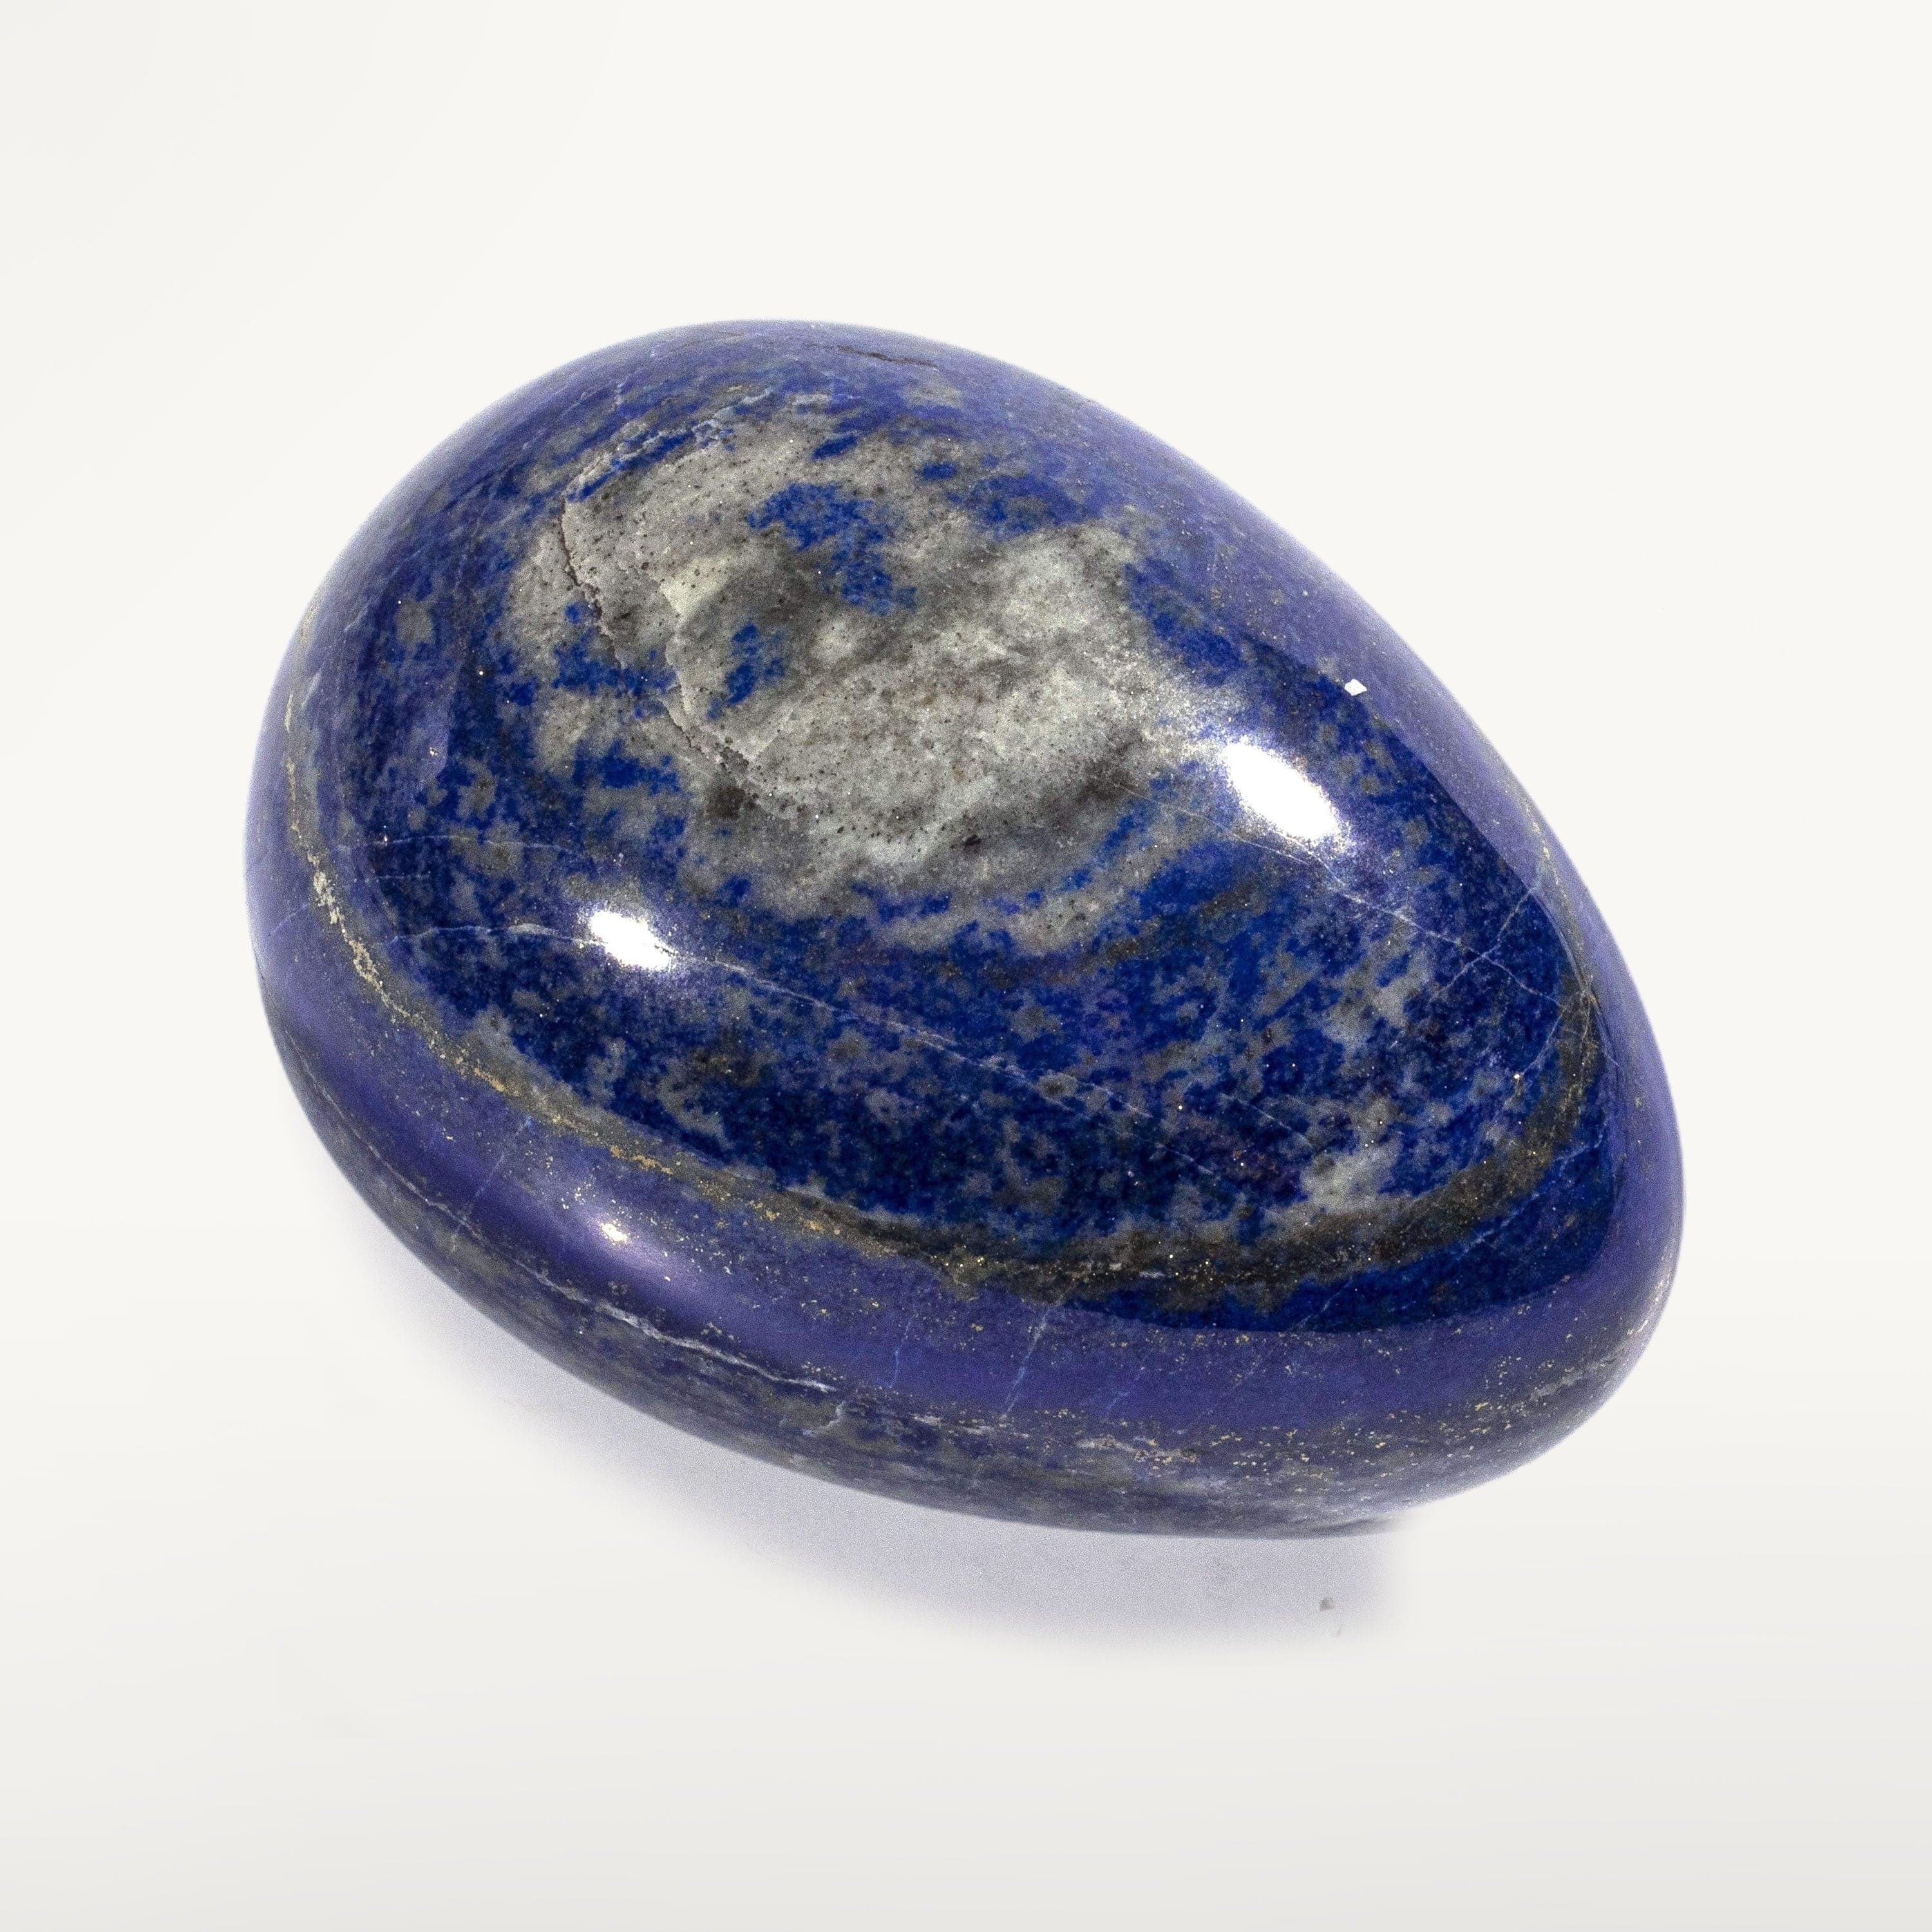 Kalifano Lapis Rare Natural Blue Lapis Lazuli Polished Egg Carving from Afghanistan - 505 g / 1.1 lbs LPS1100.004